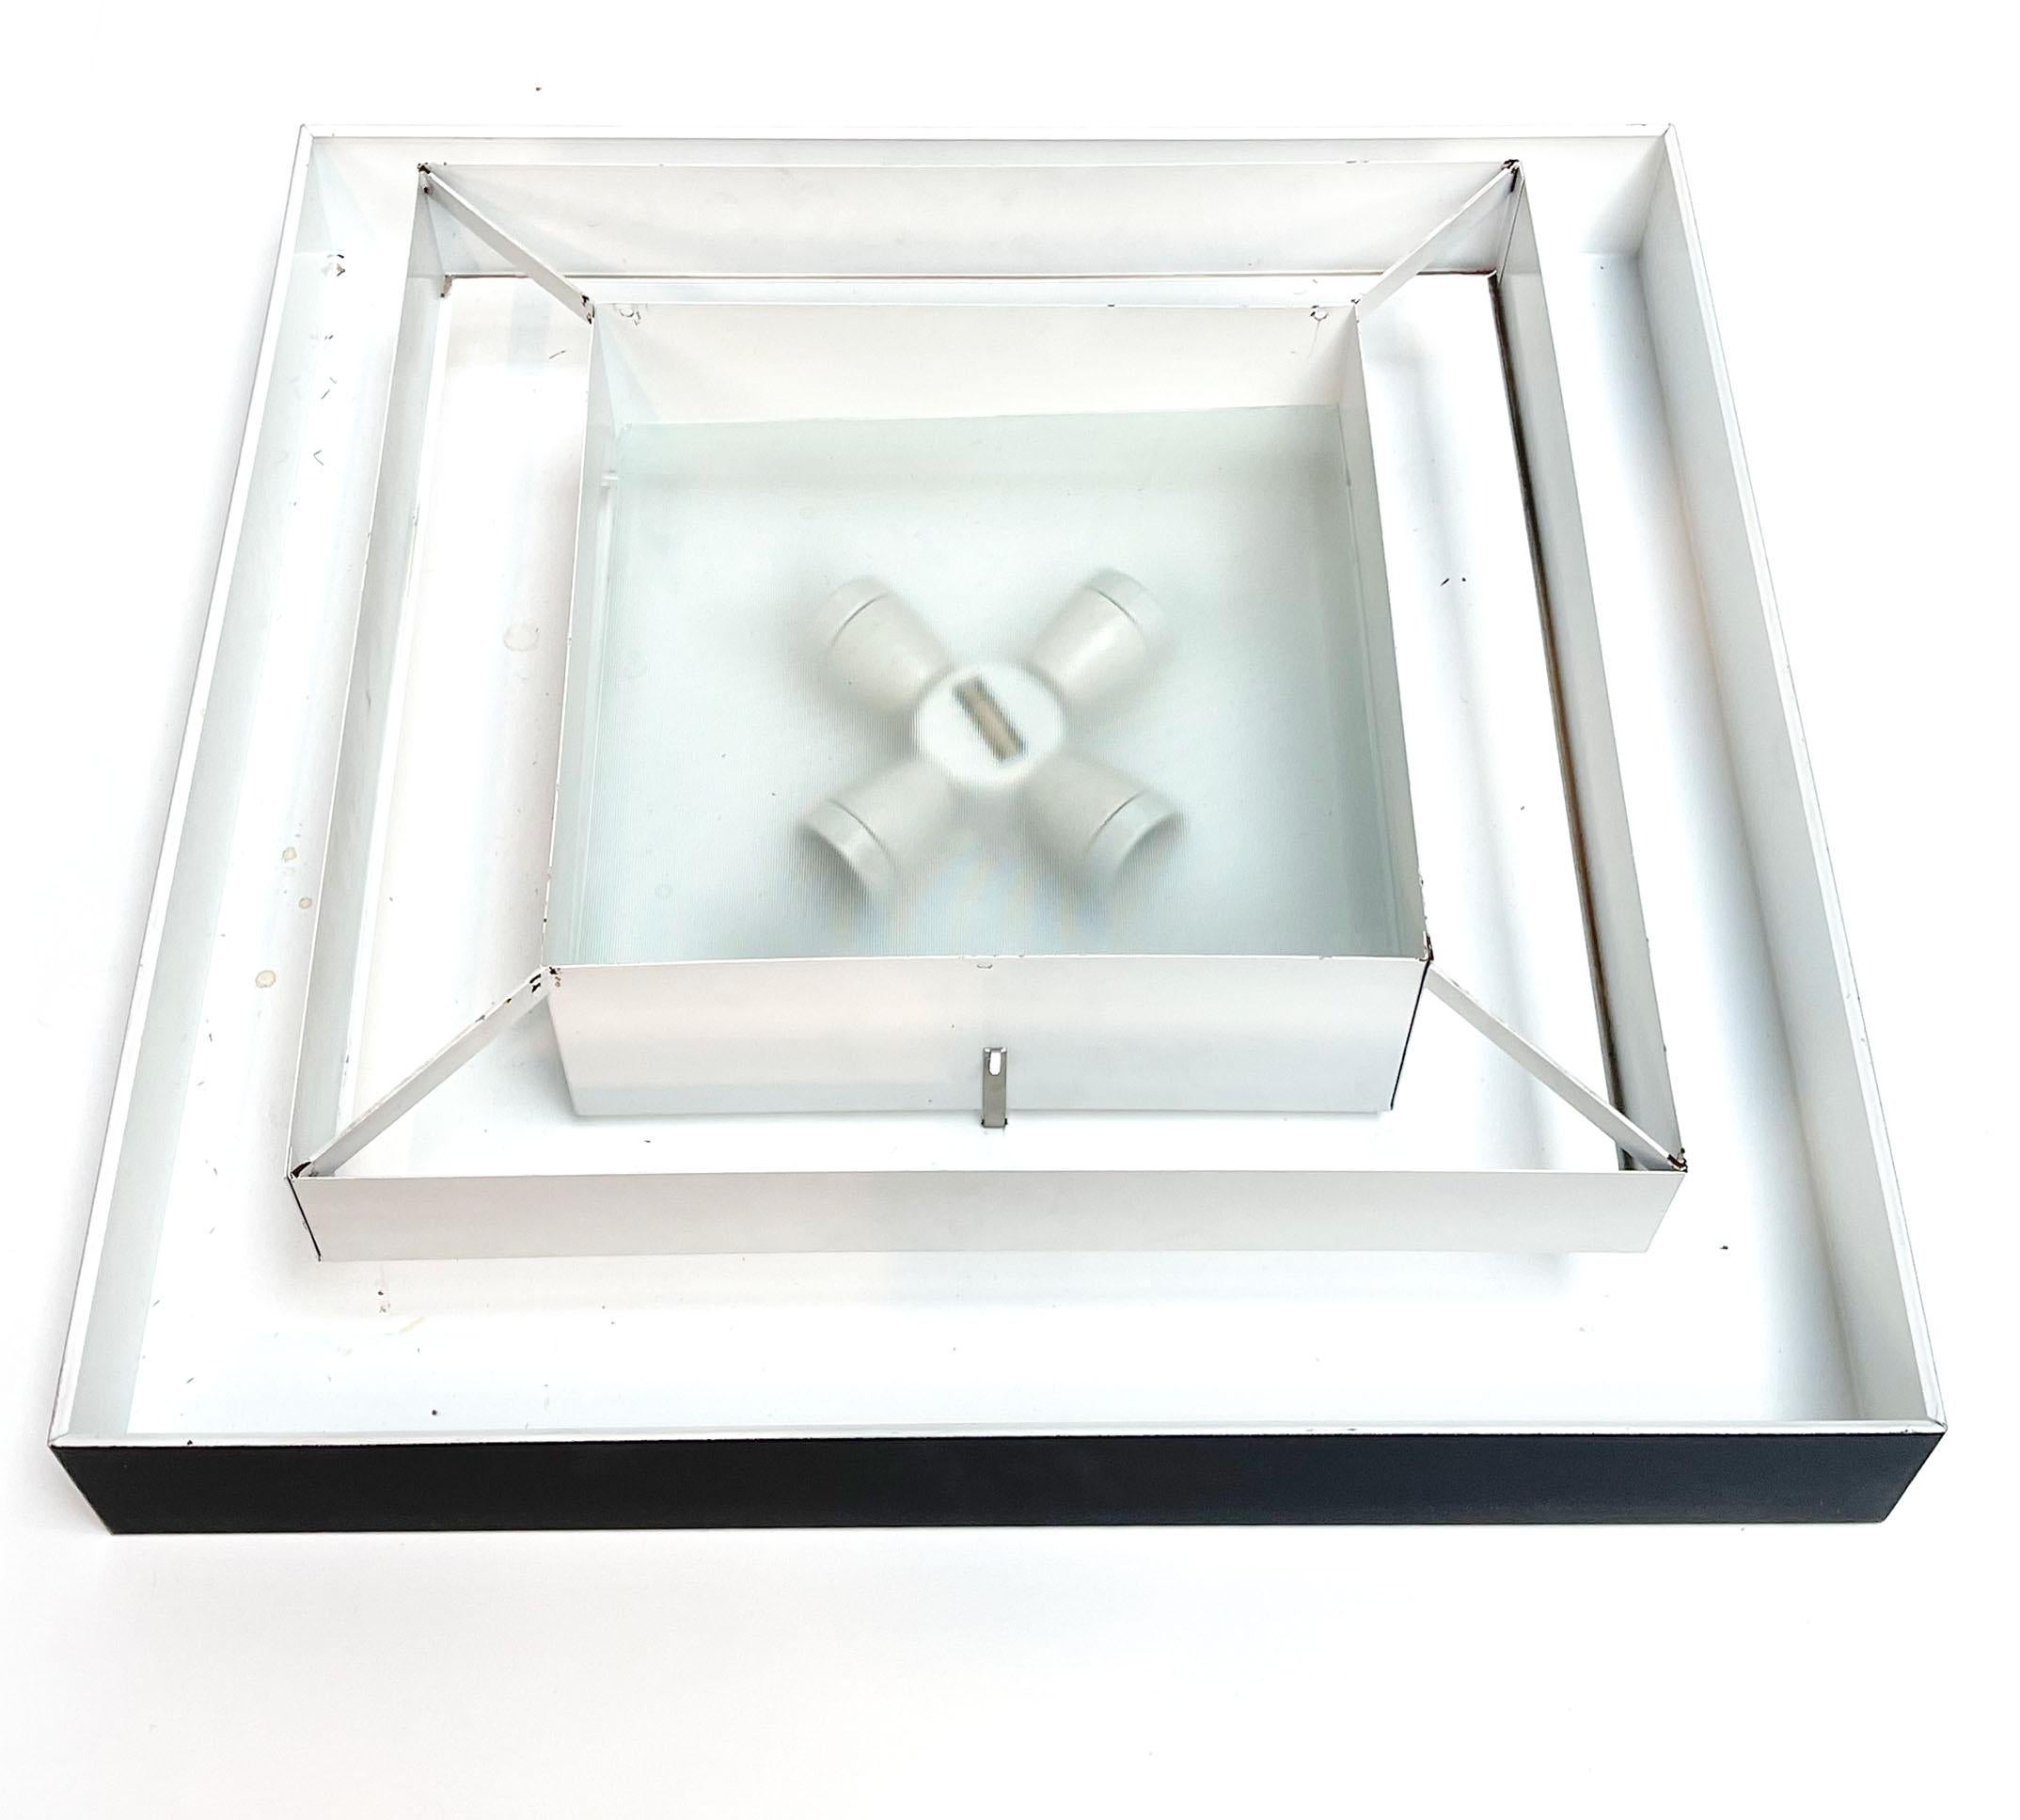 Set Raak XL R88 Ziggurat ceiling lights
Exceptional set of ceiling lights from Dutch manufacturer Raak. This model is called the Ziggurat model. 

This model has 2 version, one small and one large. This is the large version. It is quite